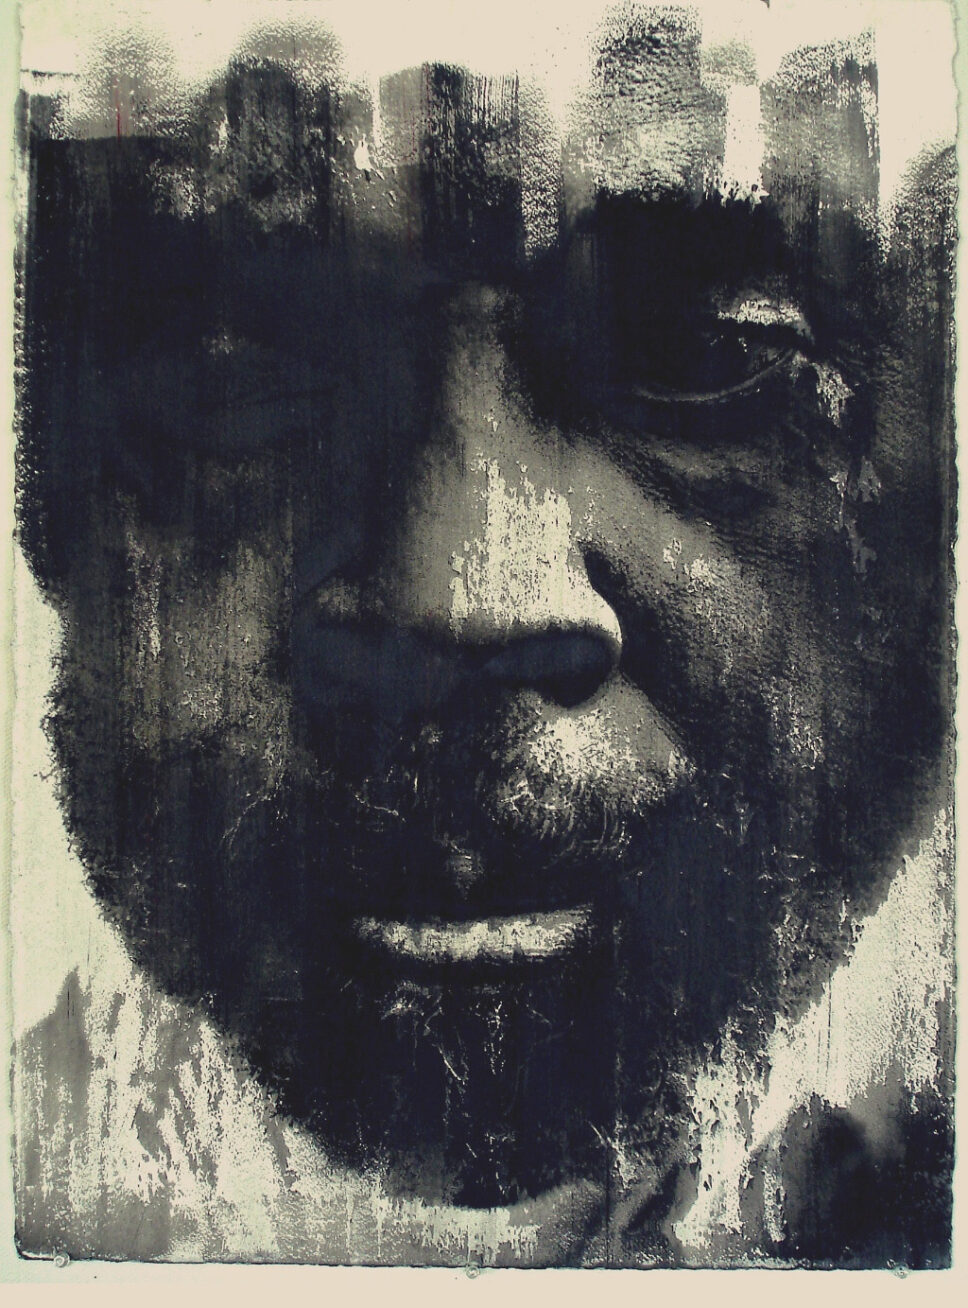 Painting of a Black man's face